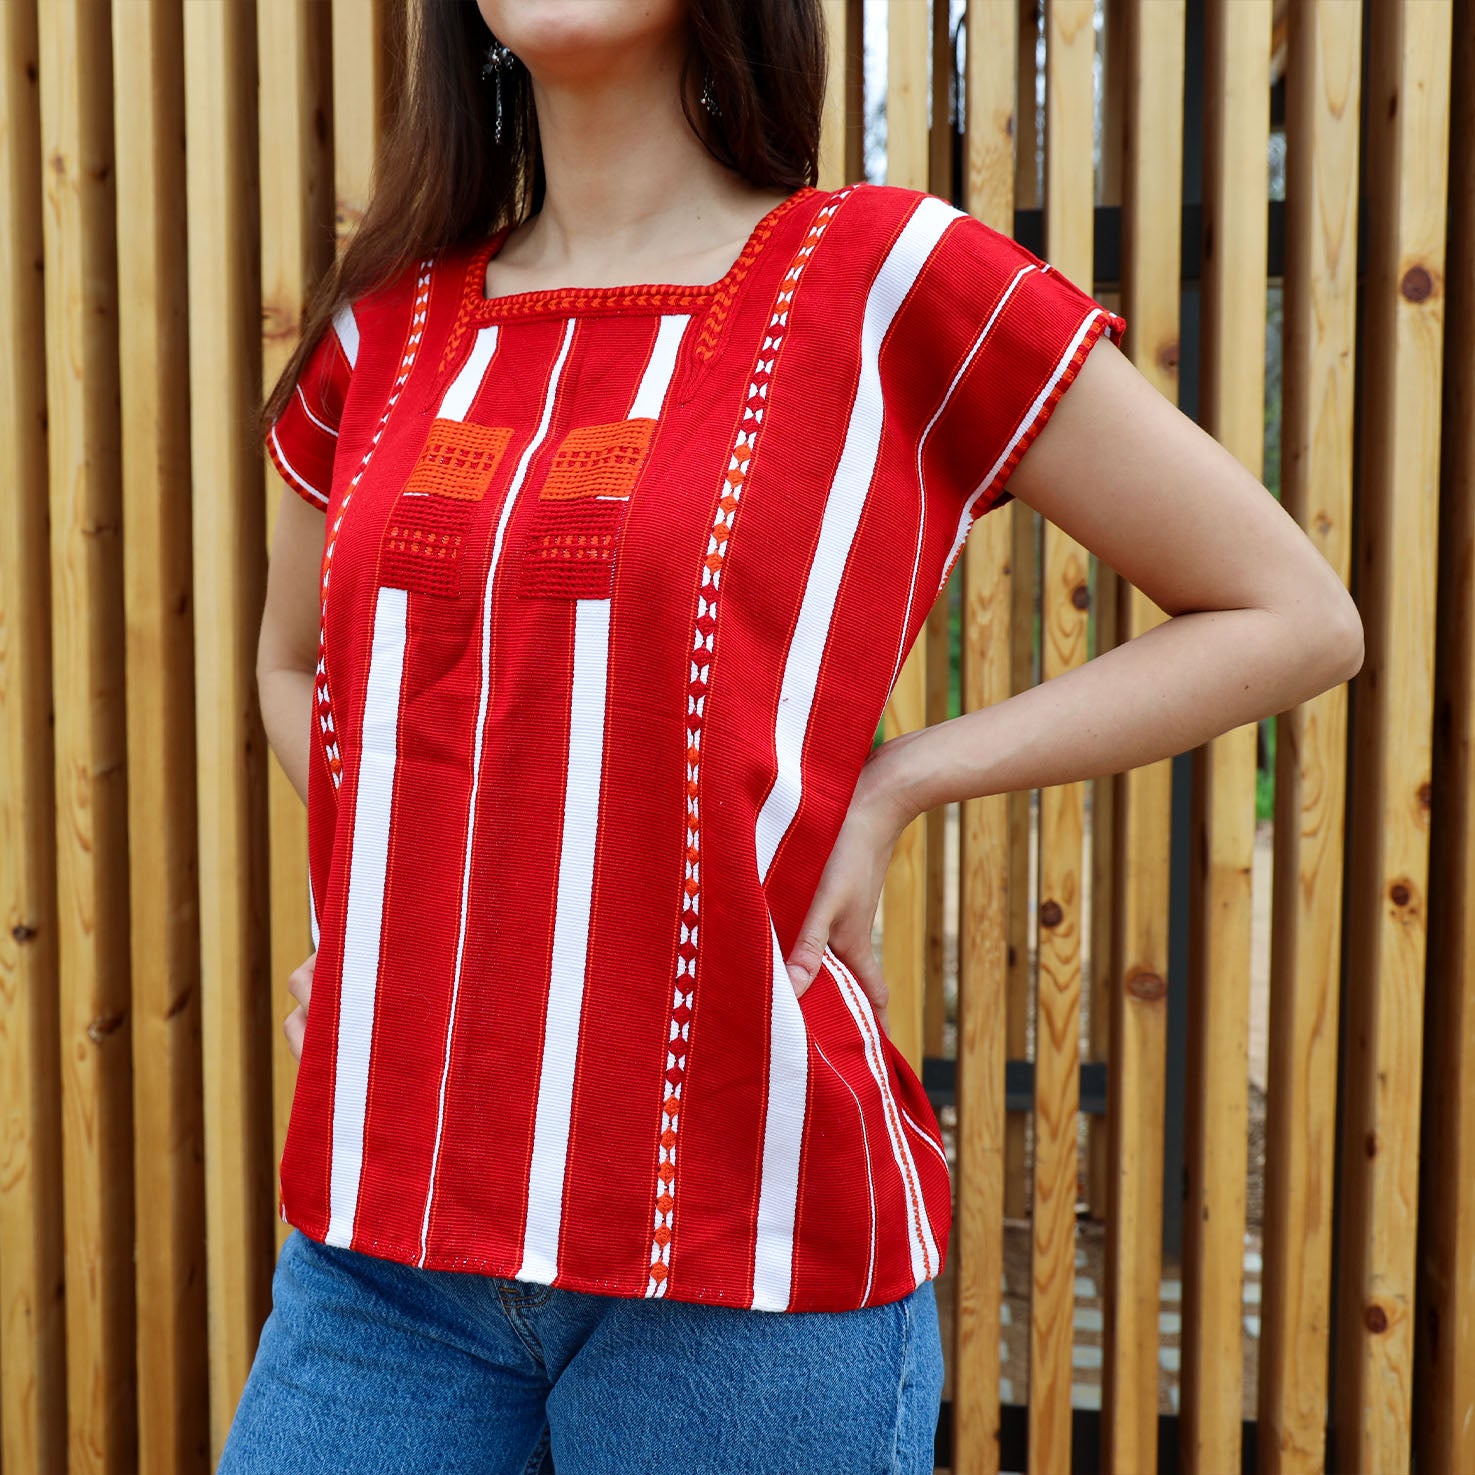 Oxchuc Not-So-Traditional Huipil Blouse